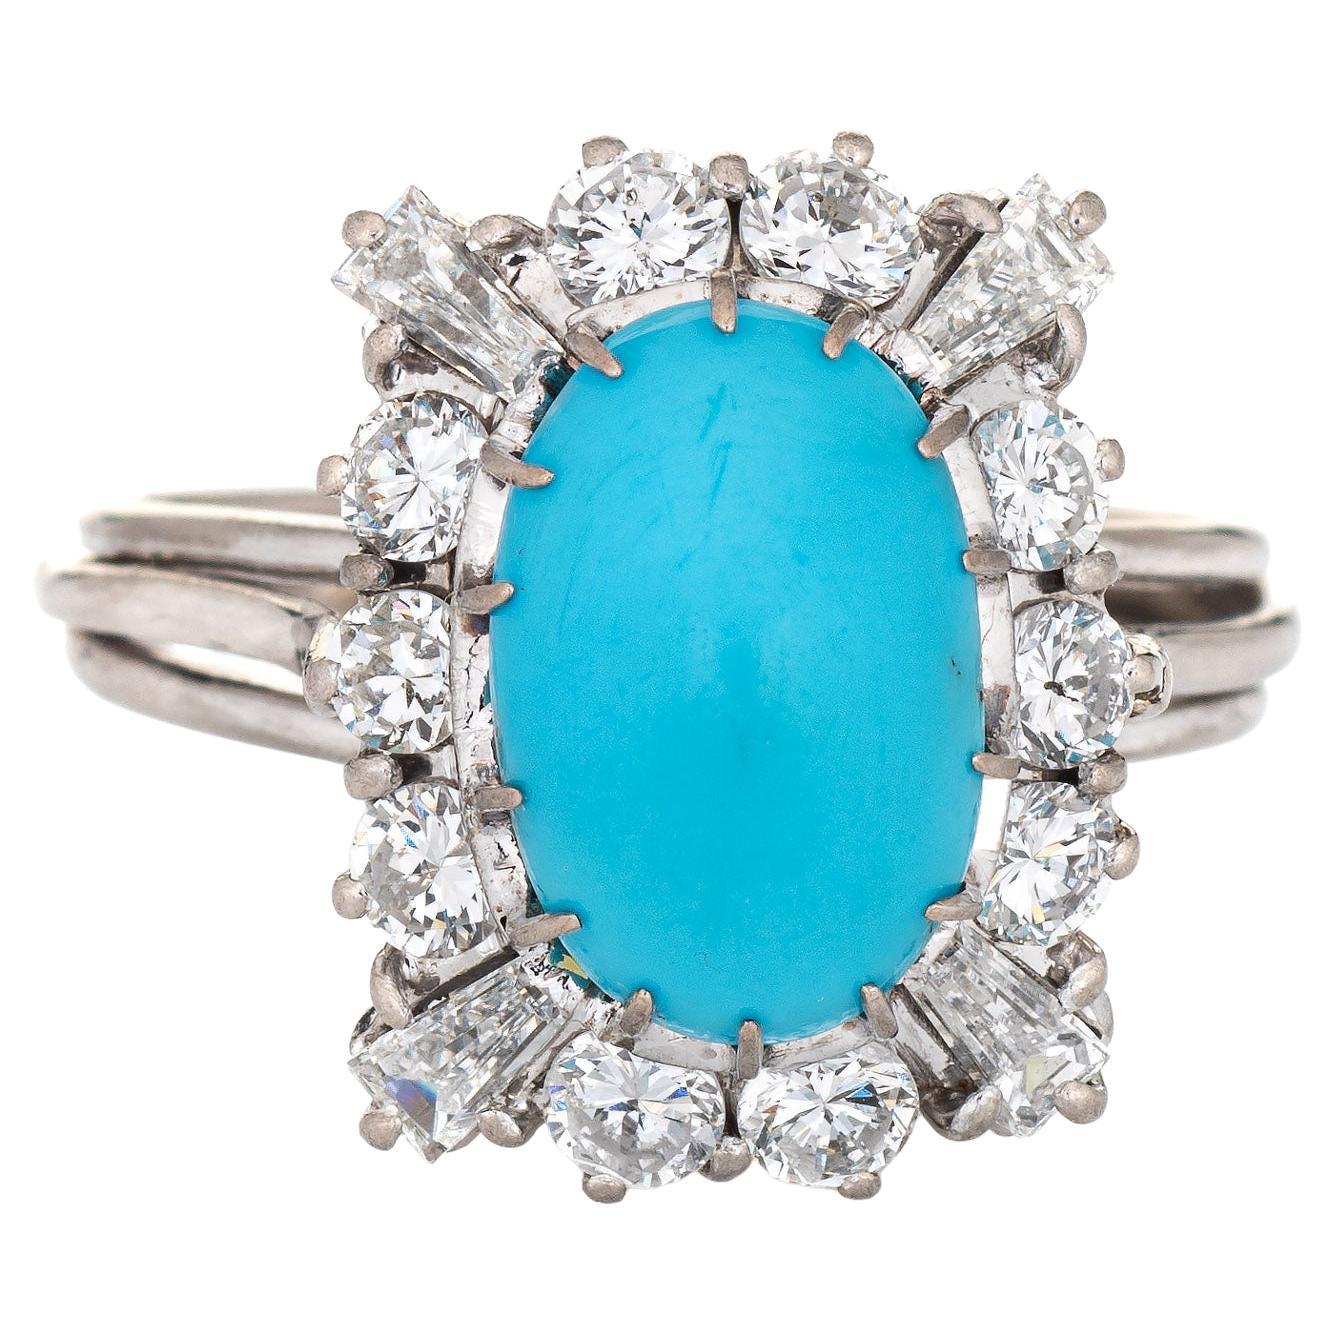 7.60ct Natural Turquoise Cocktail Ring With Diamonds Made In 18k White ...